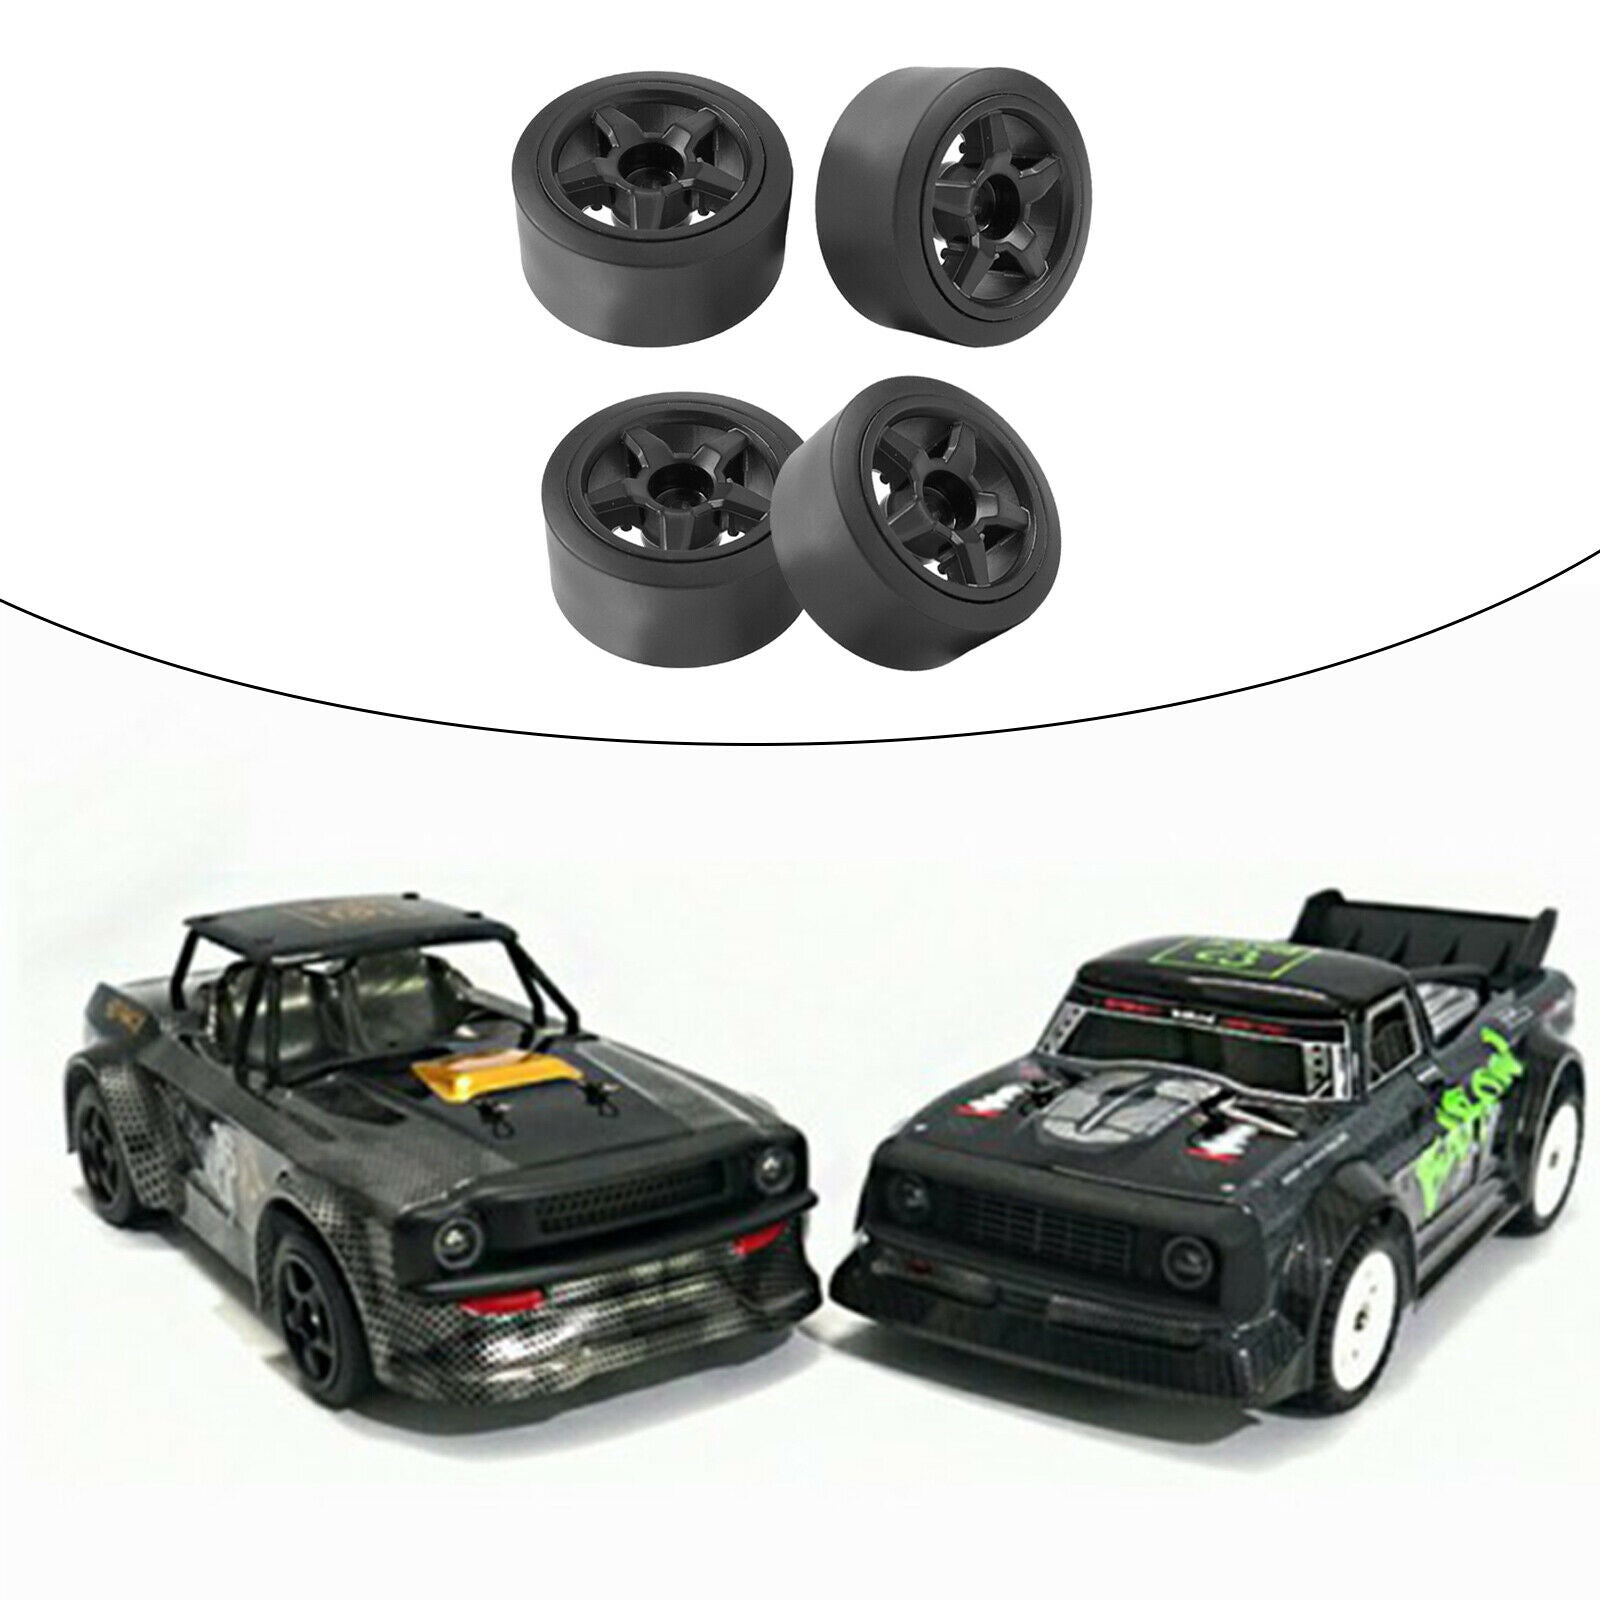 4 Pieces 5-spoke RC Drift Tires for SG-1603 Racing Truck DIY Accessories